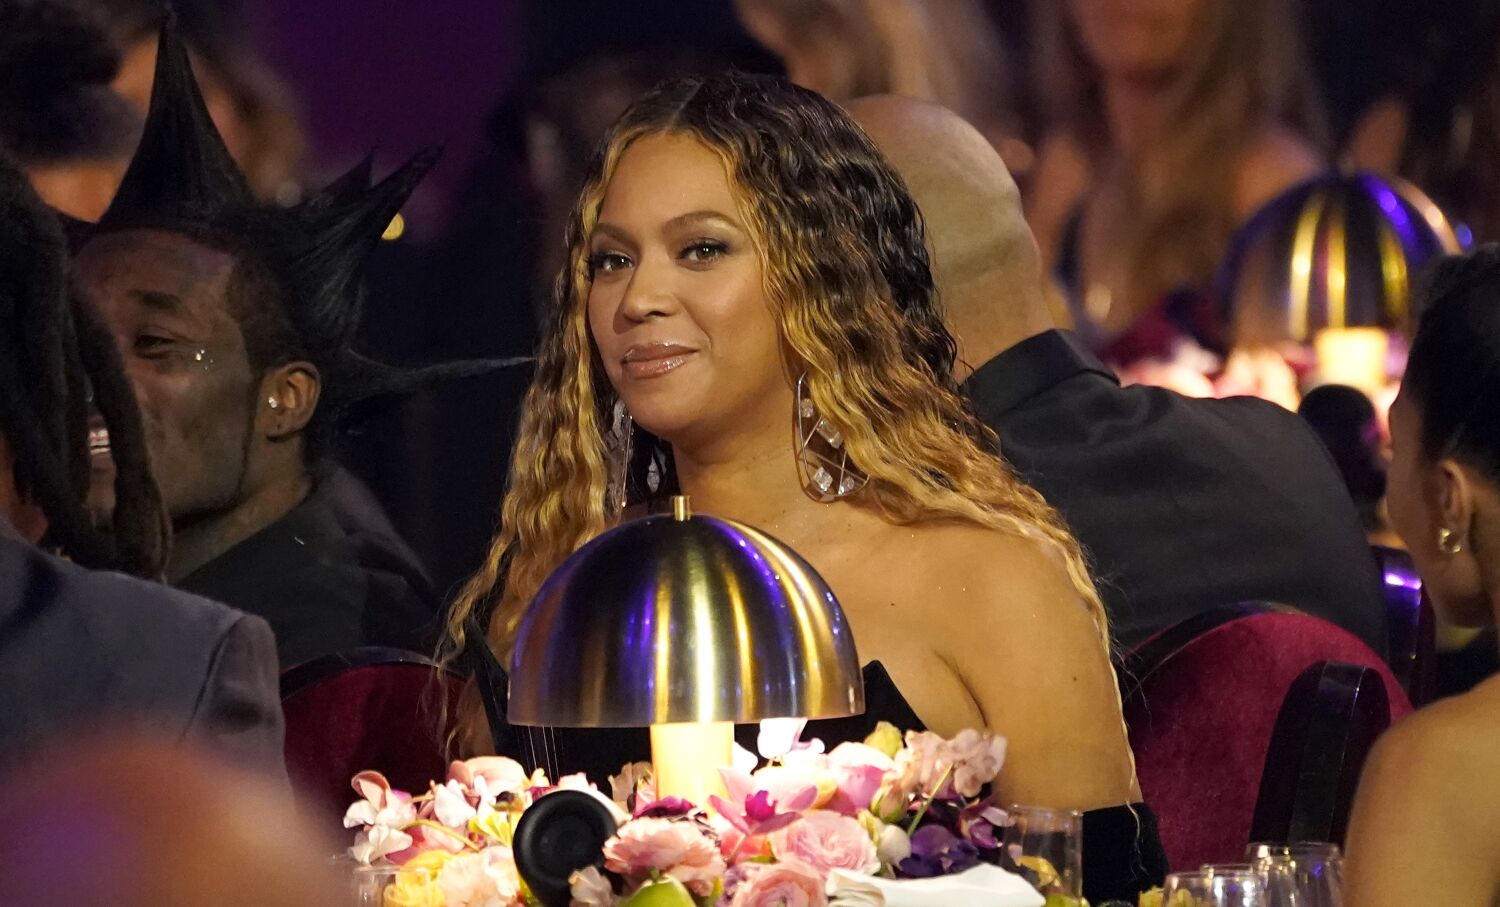 The BeyHive demands justice for Beyoncé after Grammys snub for album of the year 